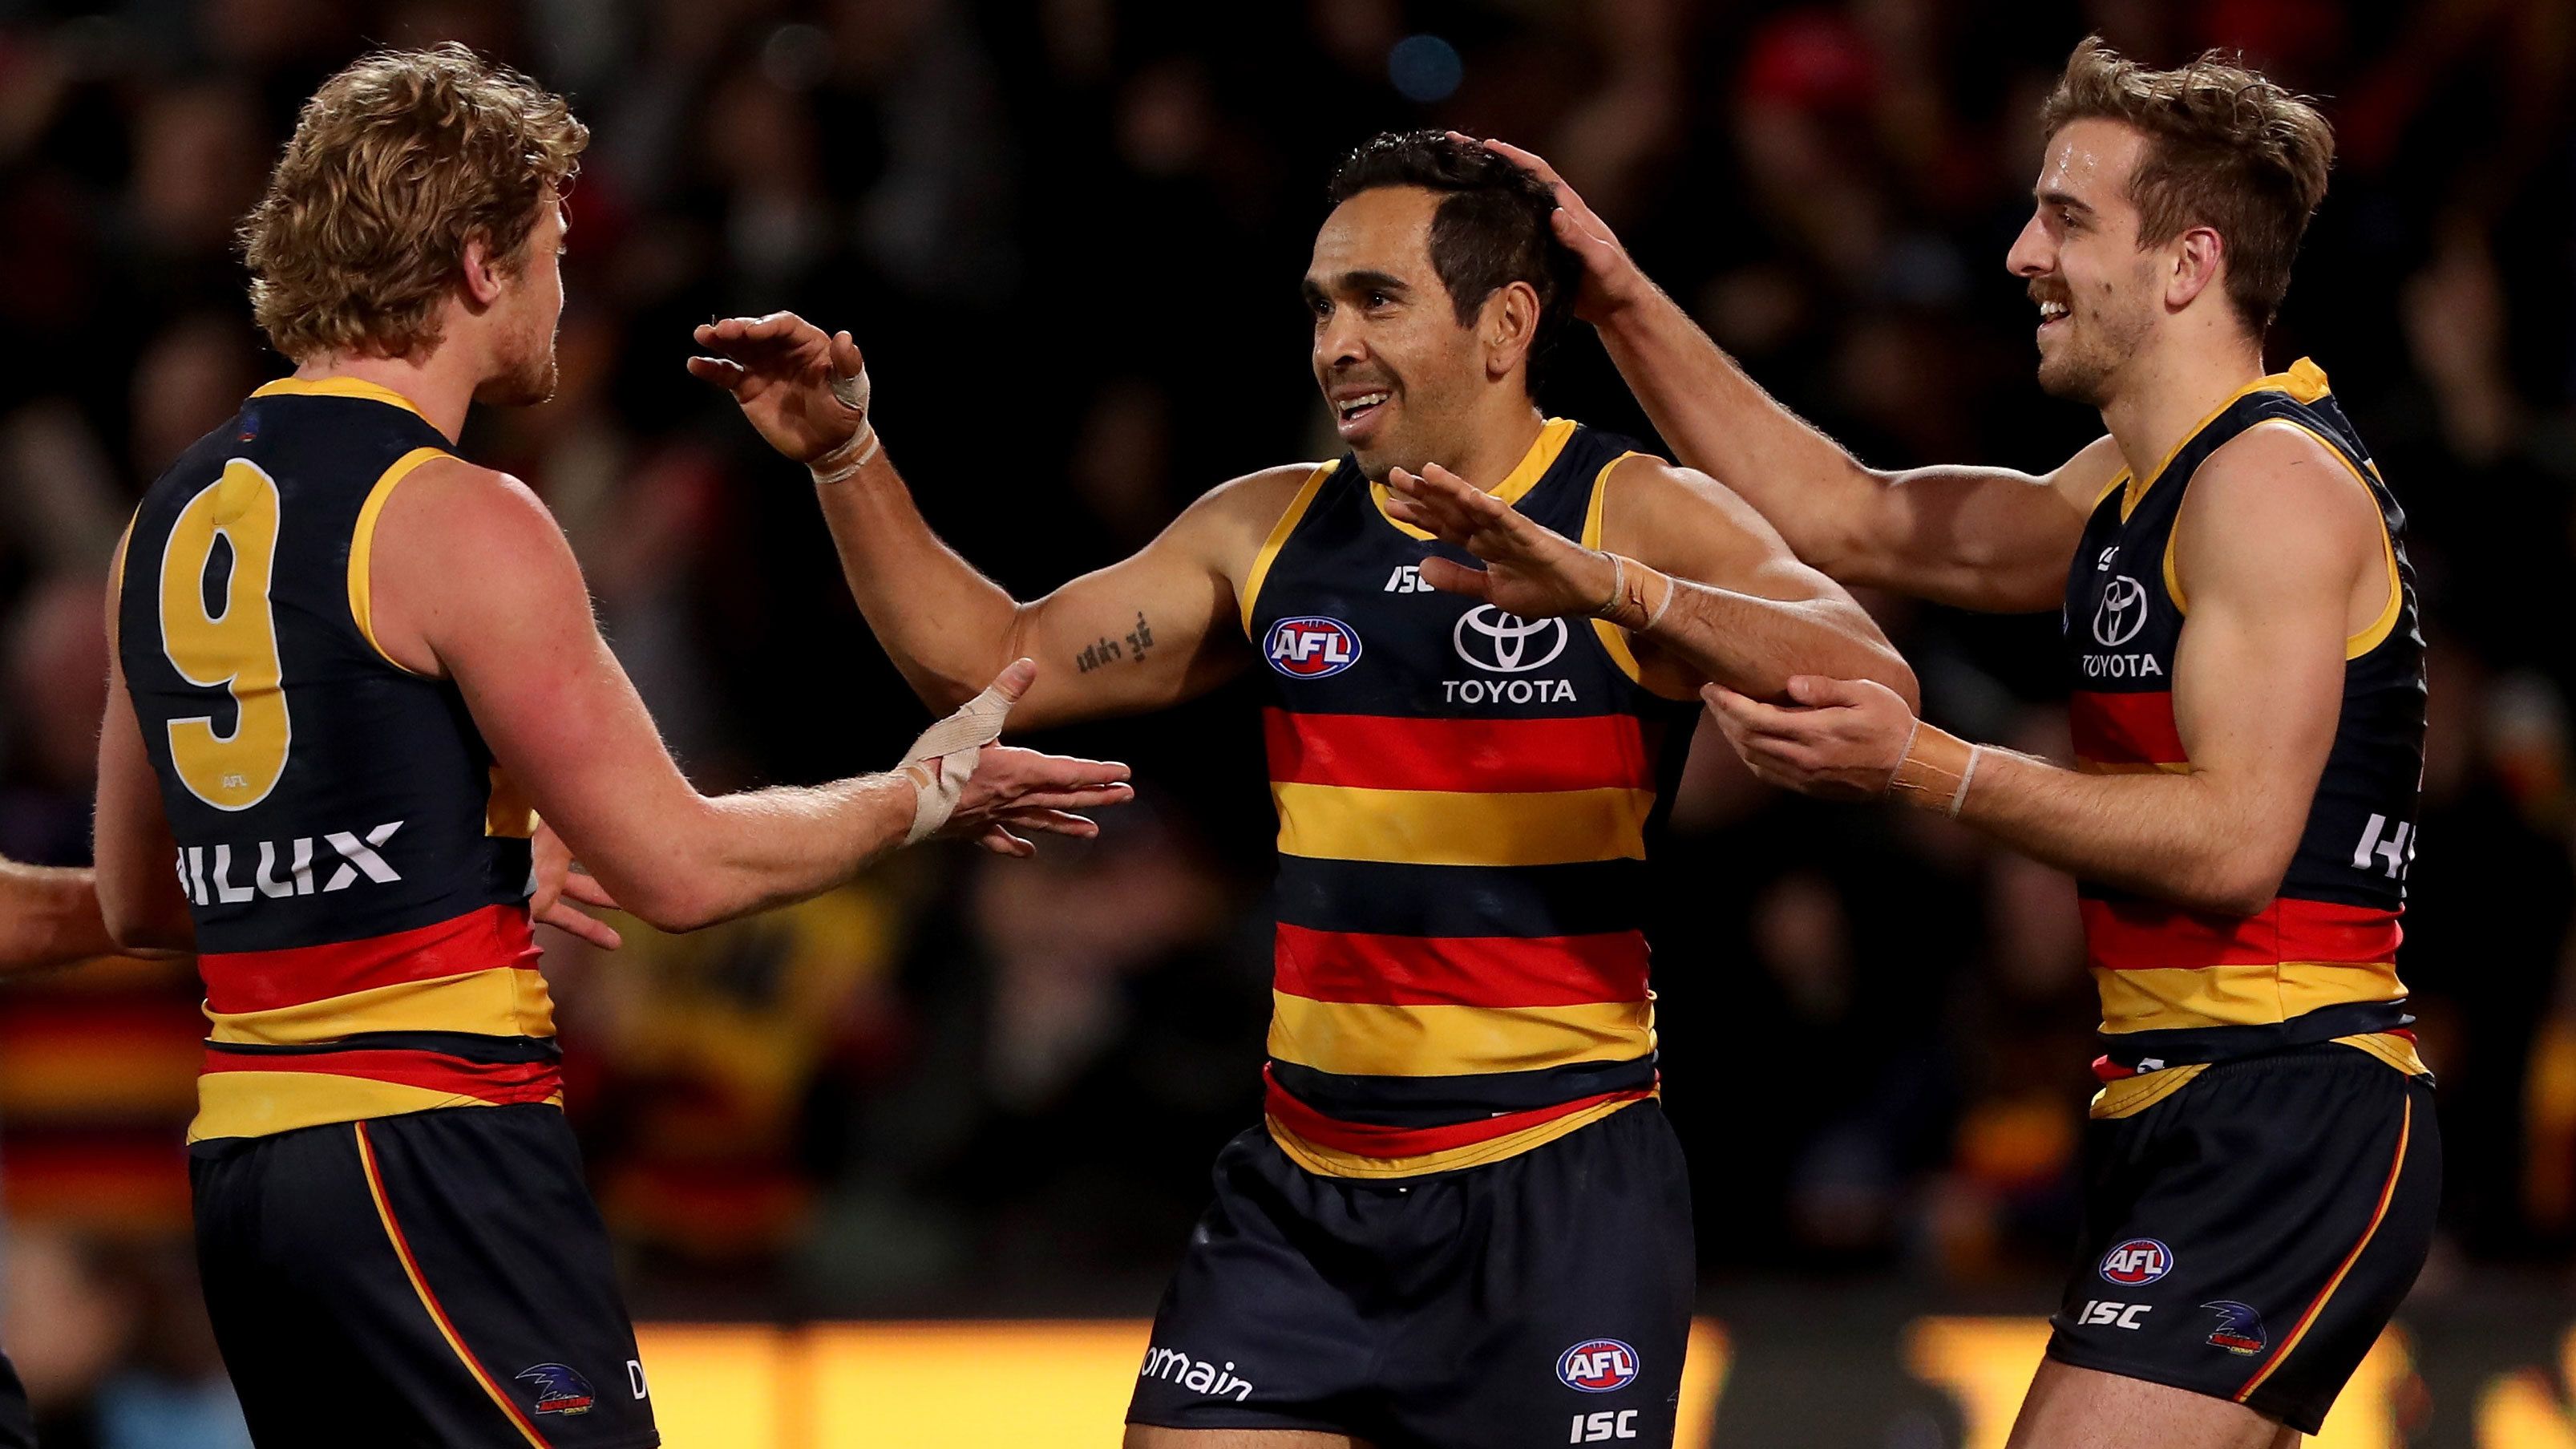 Eddie Betts celebrates a goal with Crows teammates in 2018.